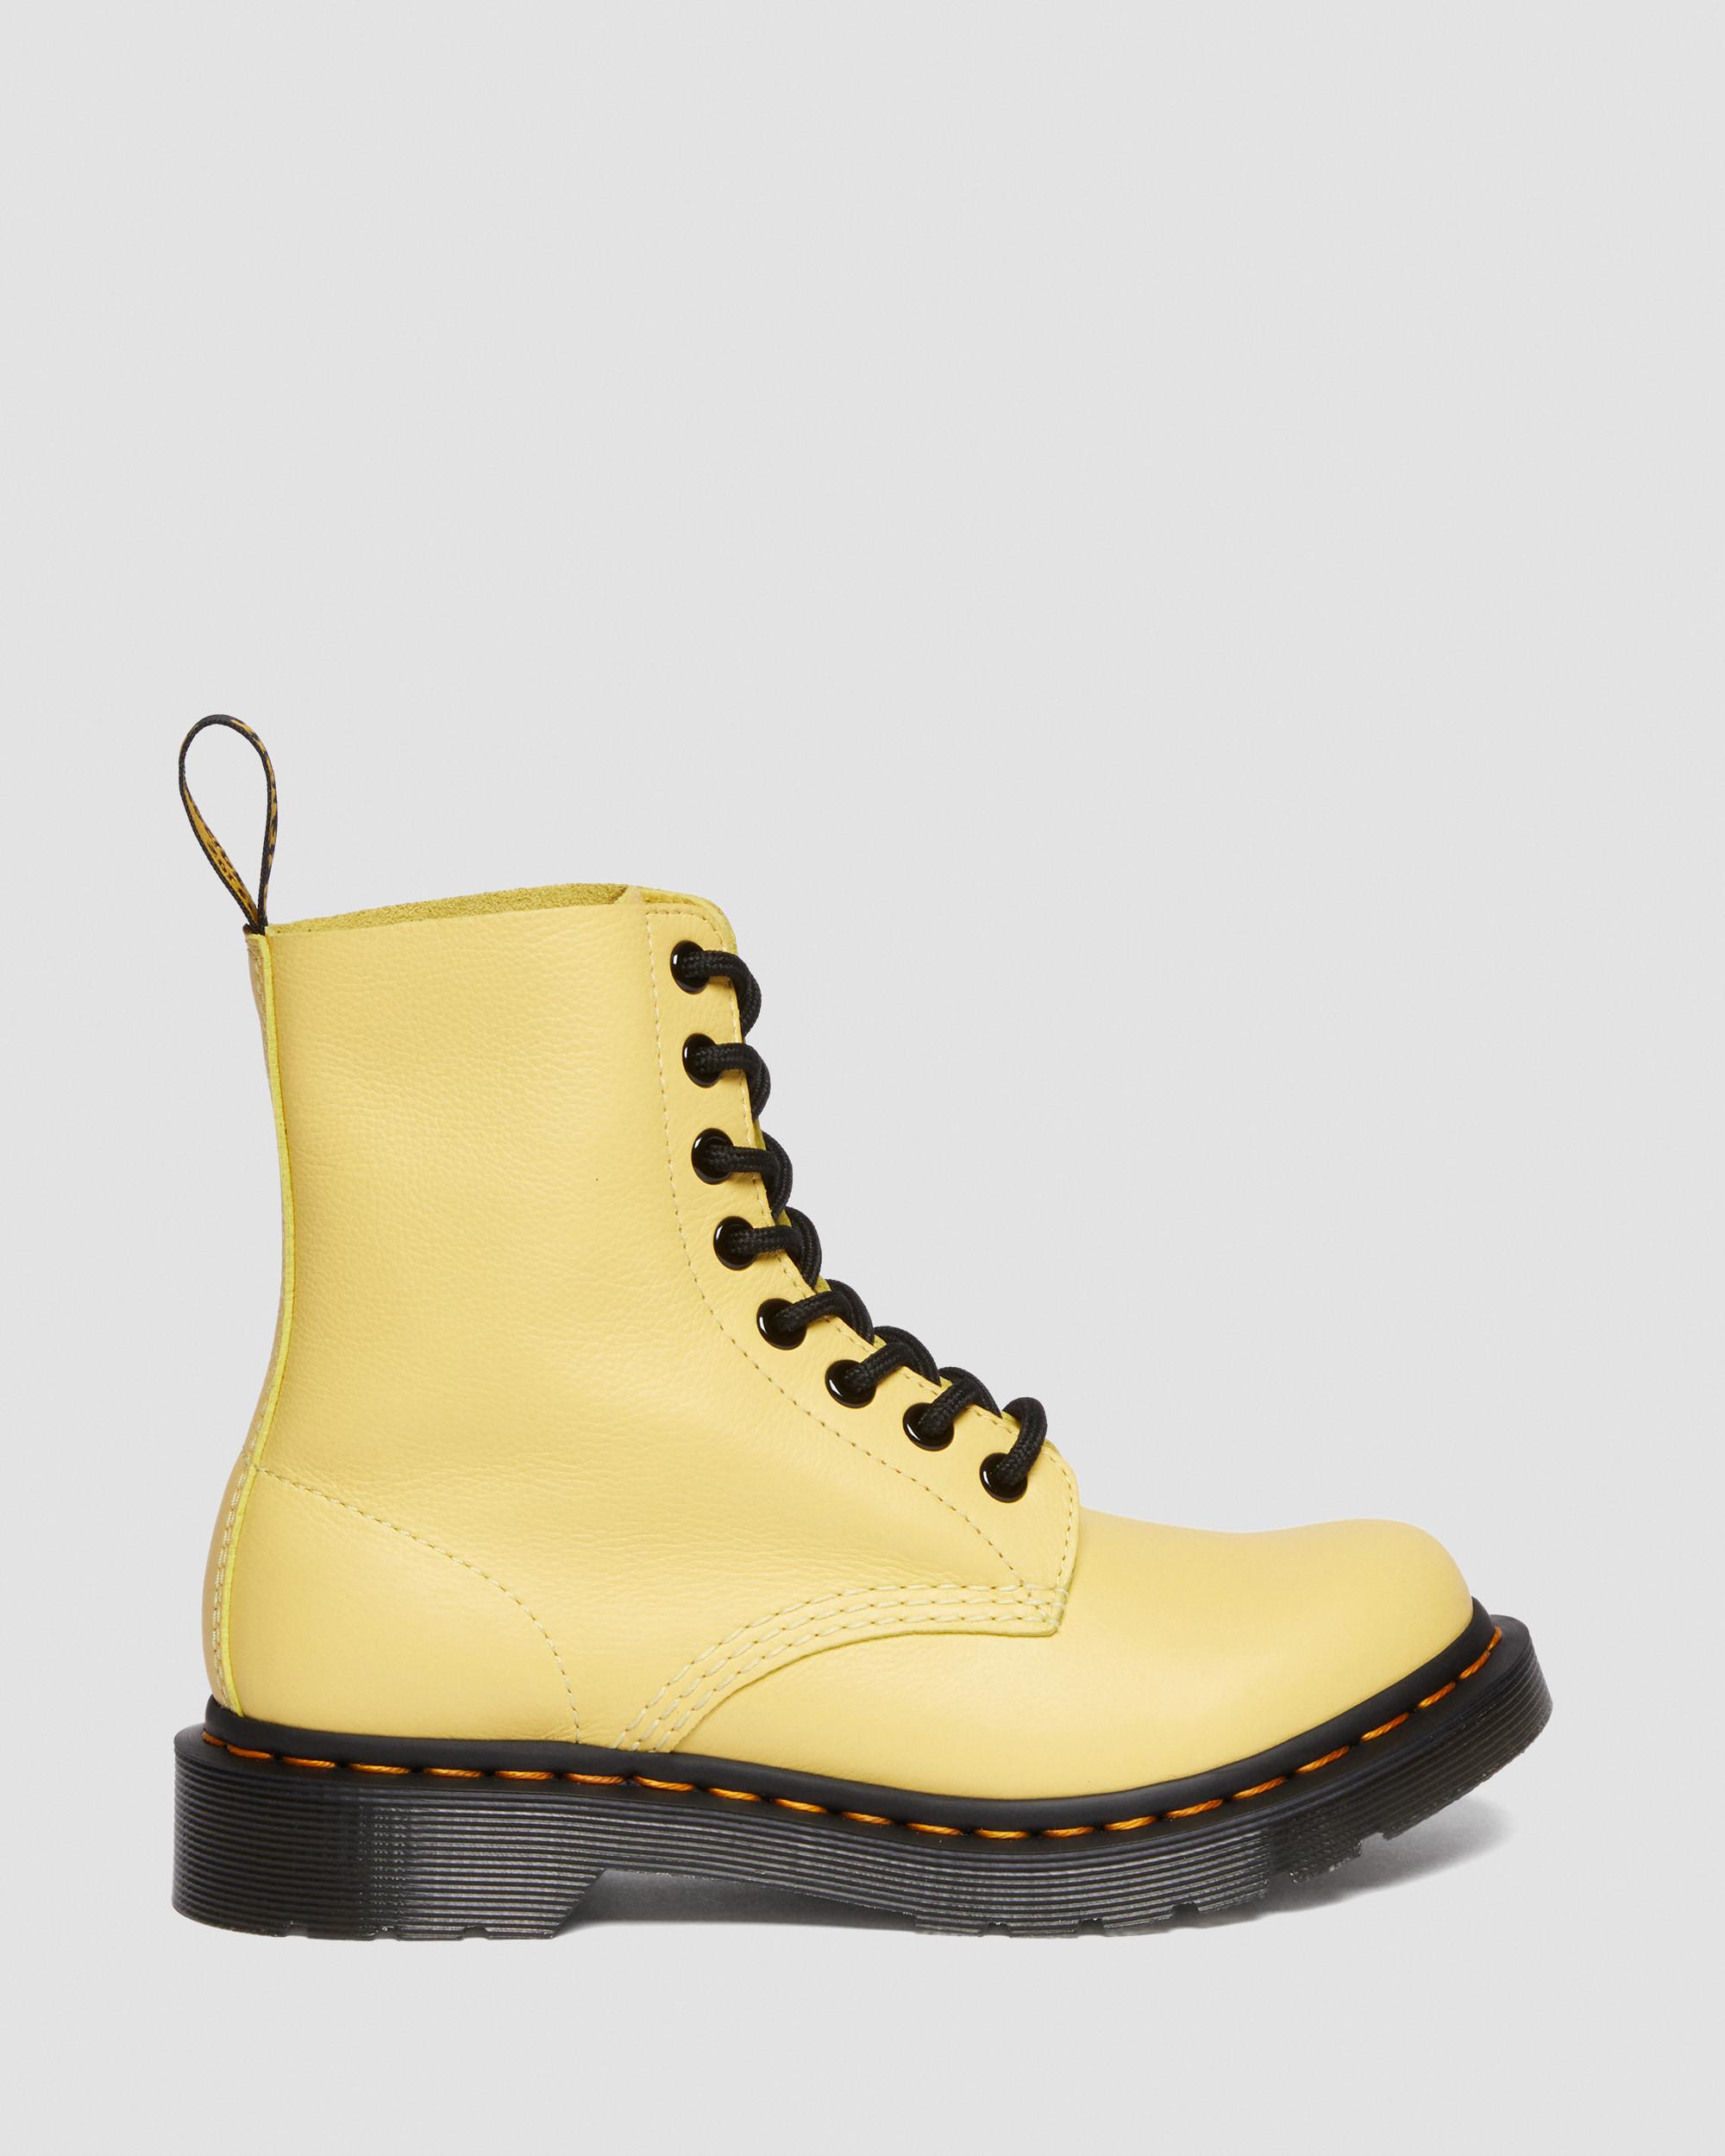 1460 Women's Pascal Black Eyelet Lace Up Boots in Lemon Yellow | Dr ...